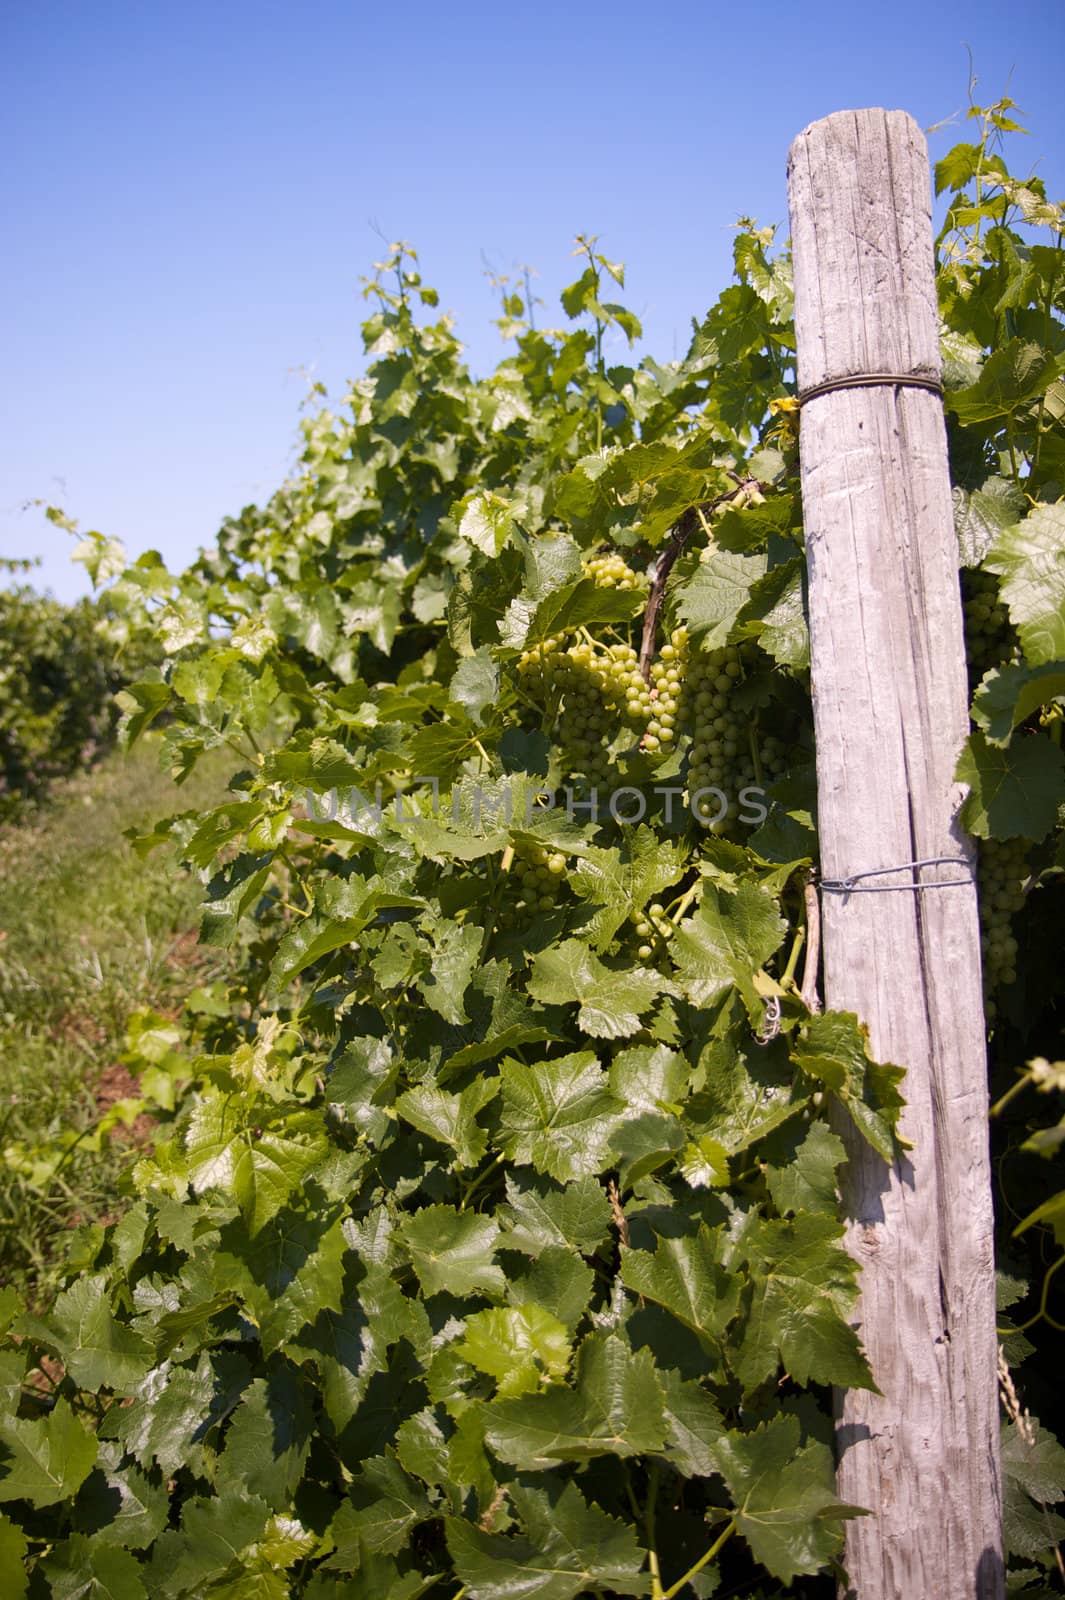 End of vineyard row with grapes looking down the row